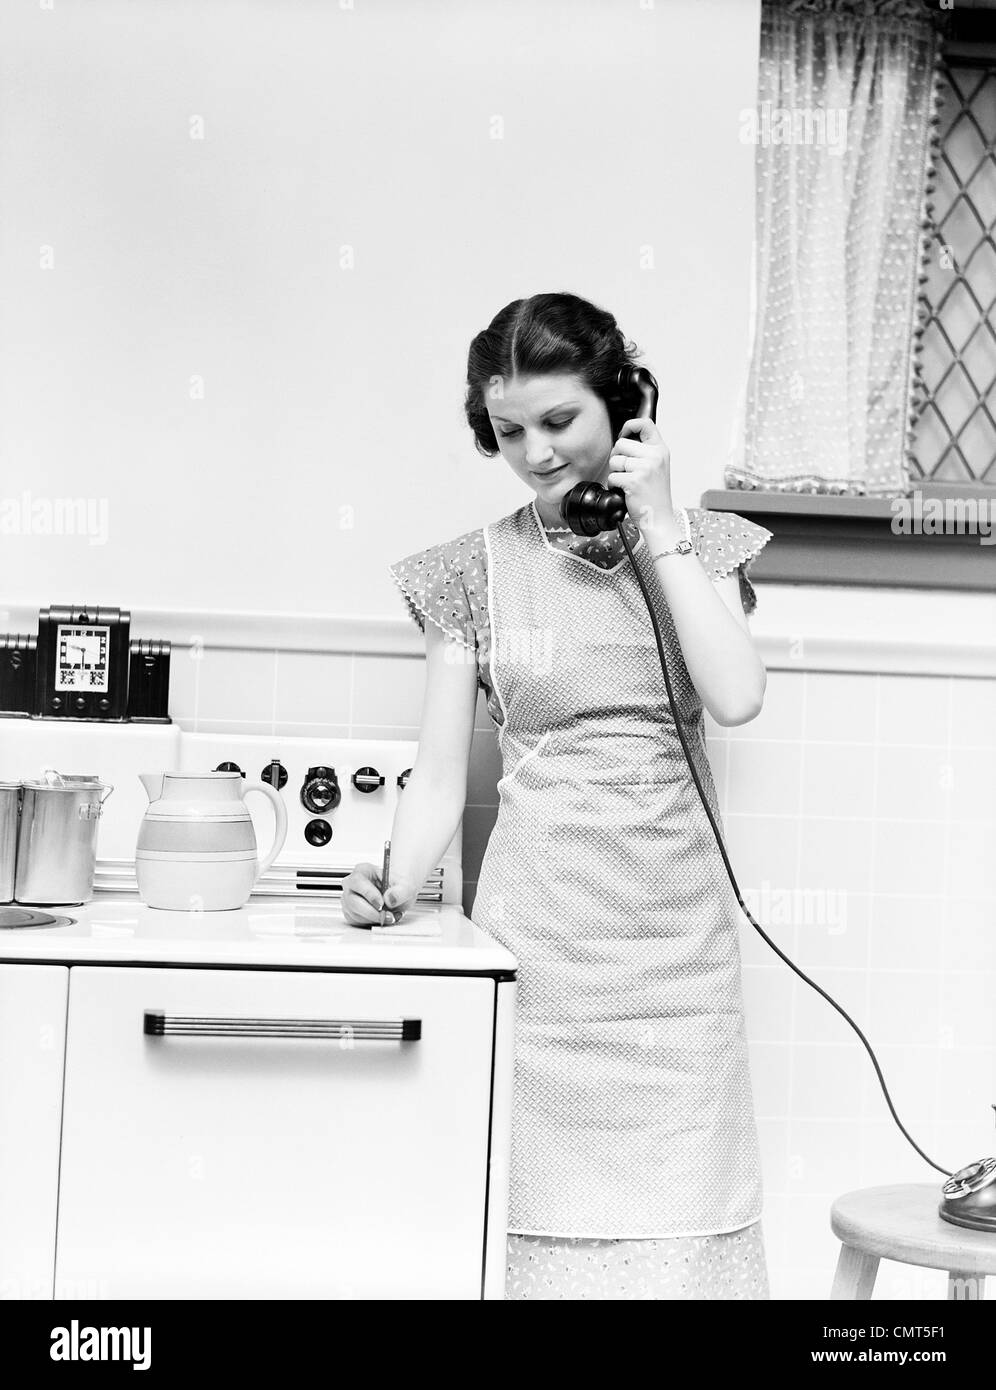 1930s WOMAN HOUSEWIFE STANDING KITCHEN BY STOVE TALKING ON TELEPHONE WRITING ON PAD WEARING APRON Stock Photo